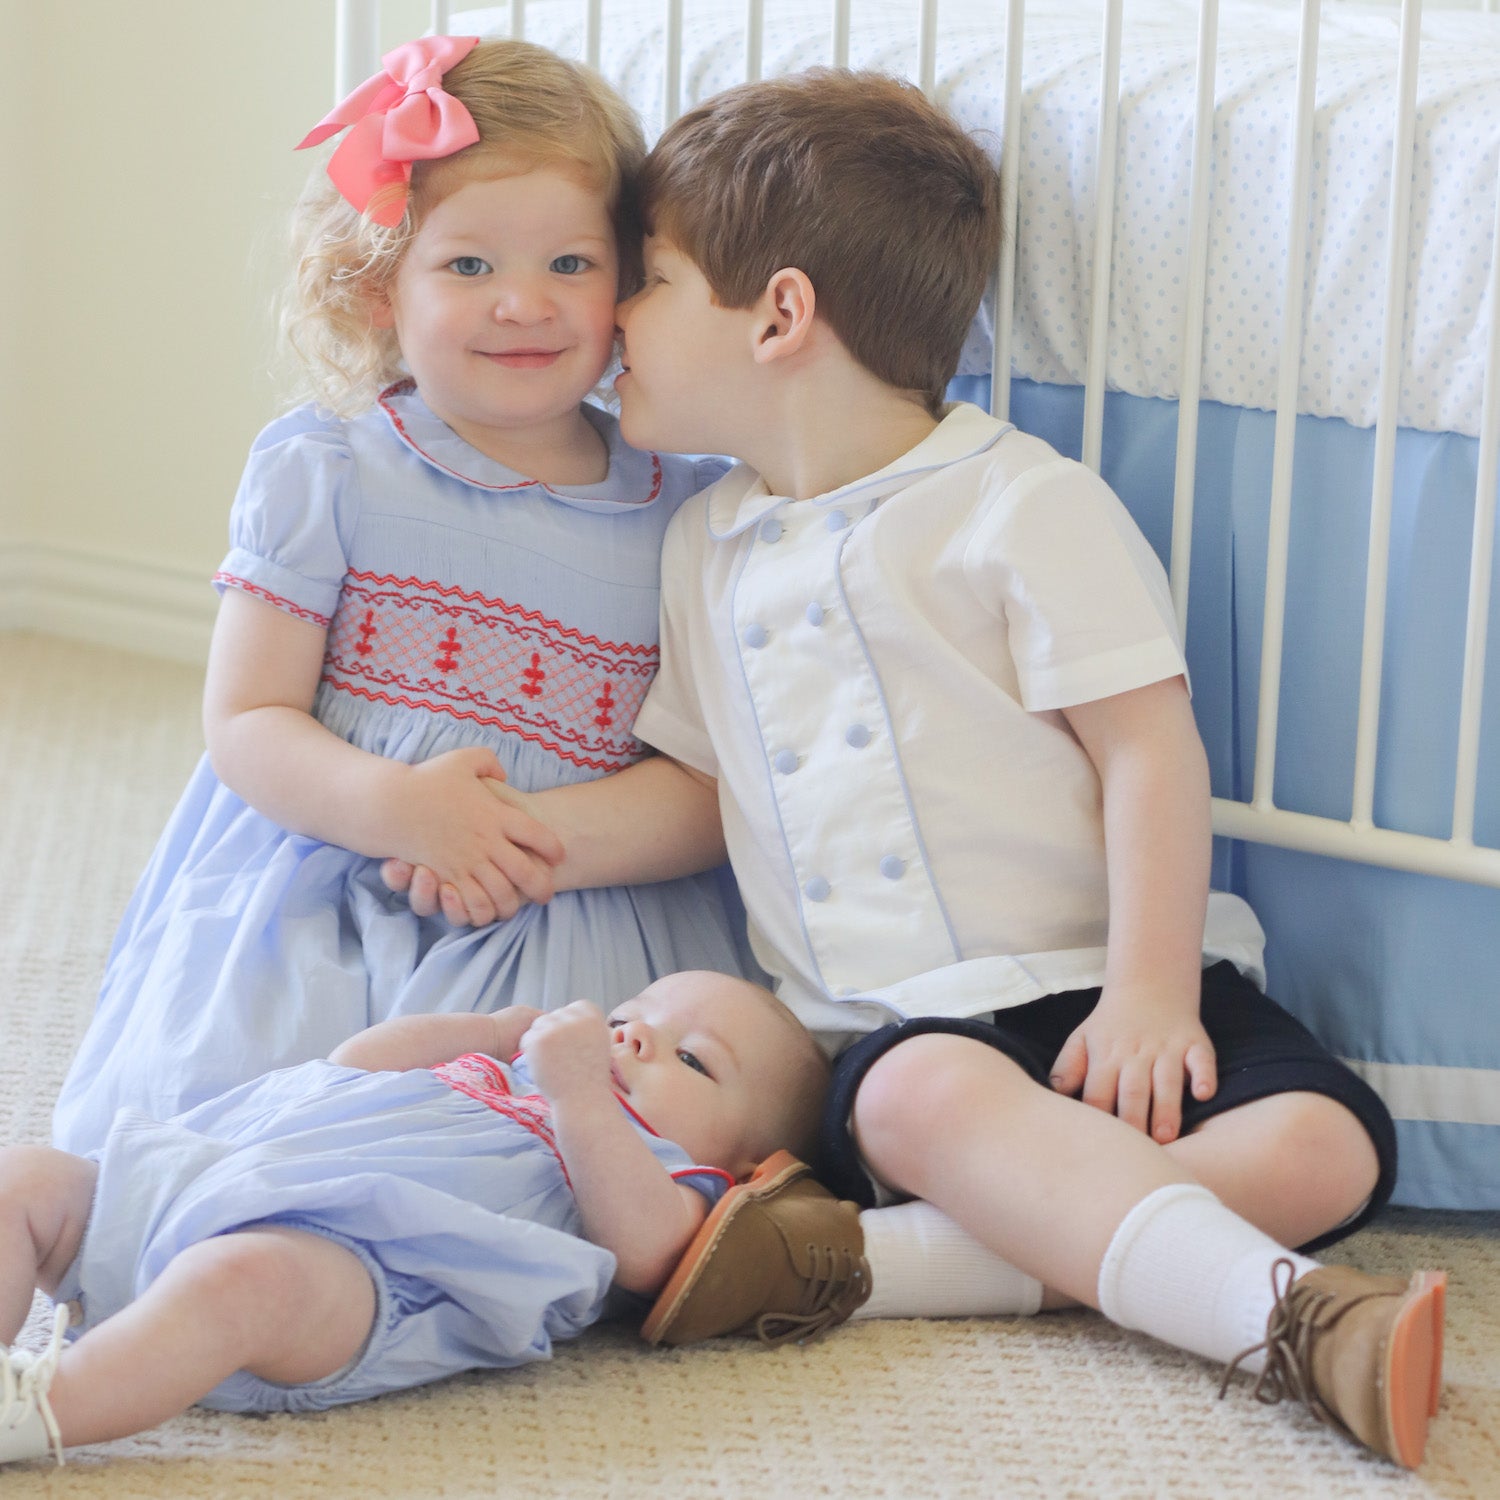 Royal family inspired matching sibling outfits